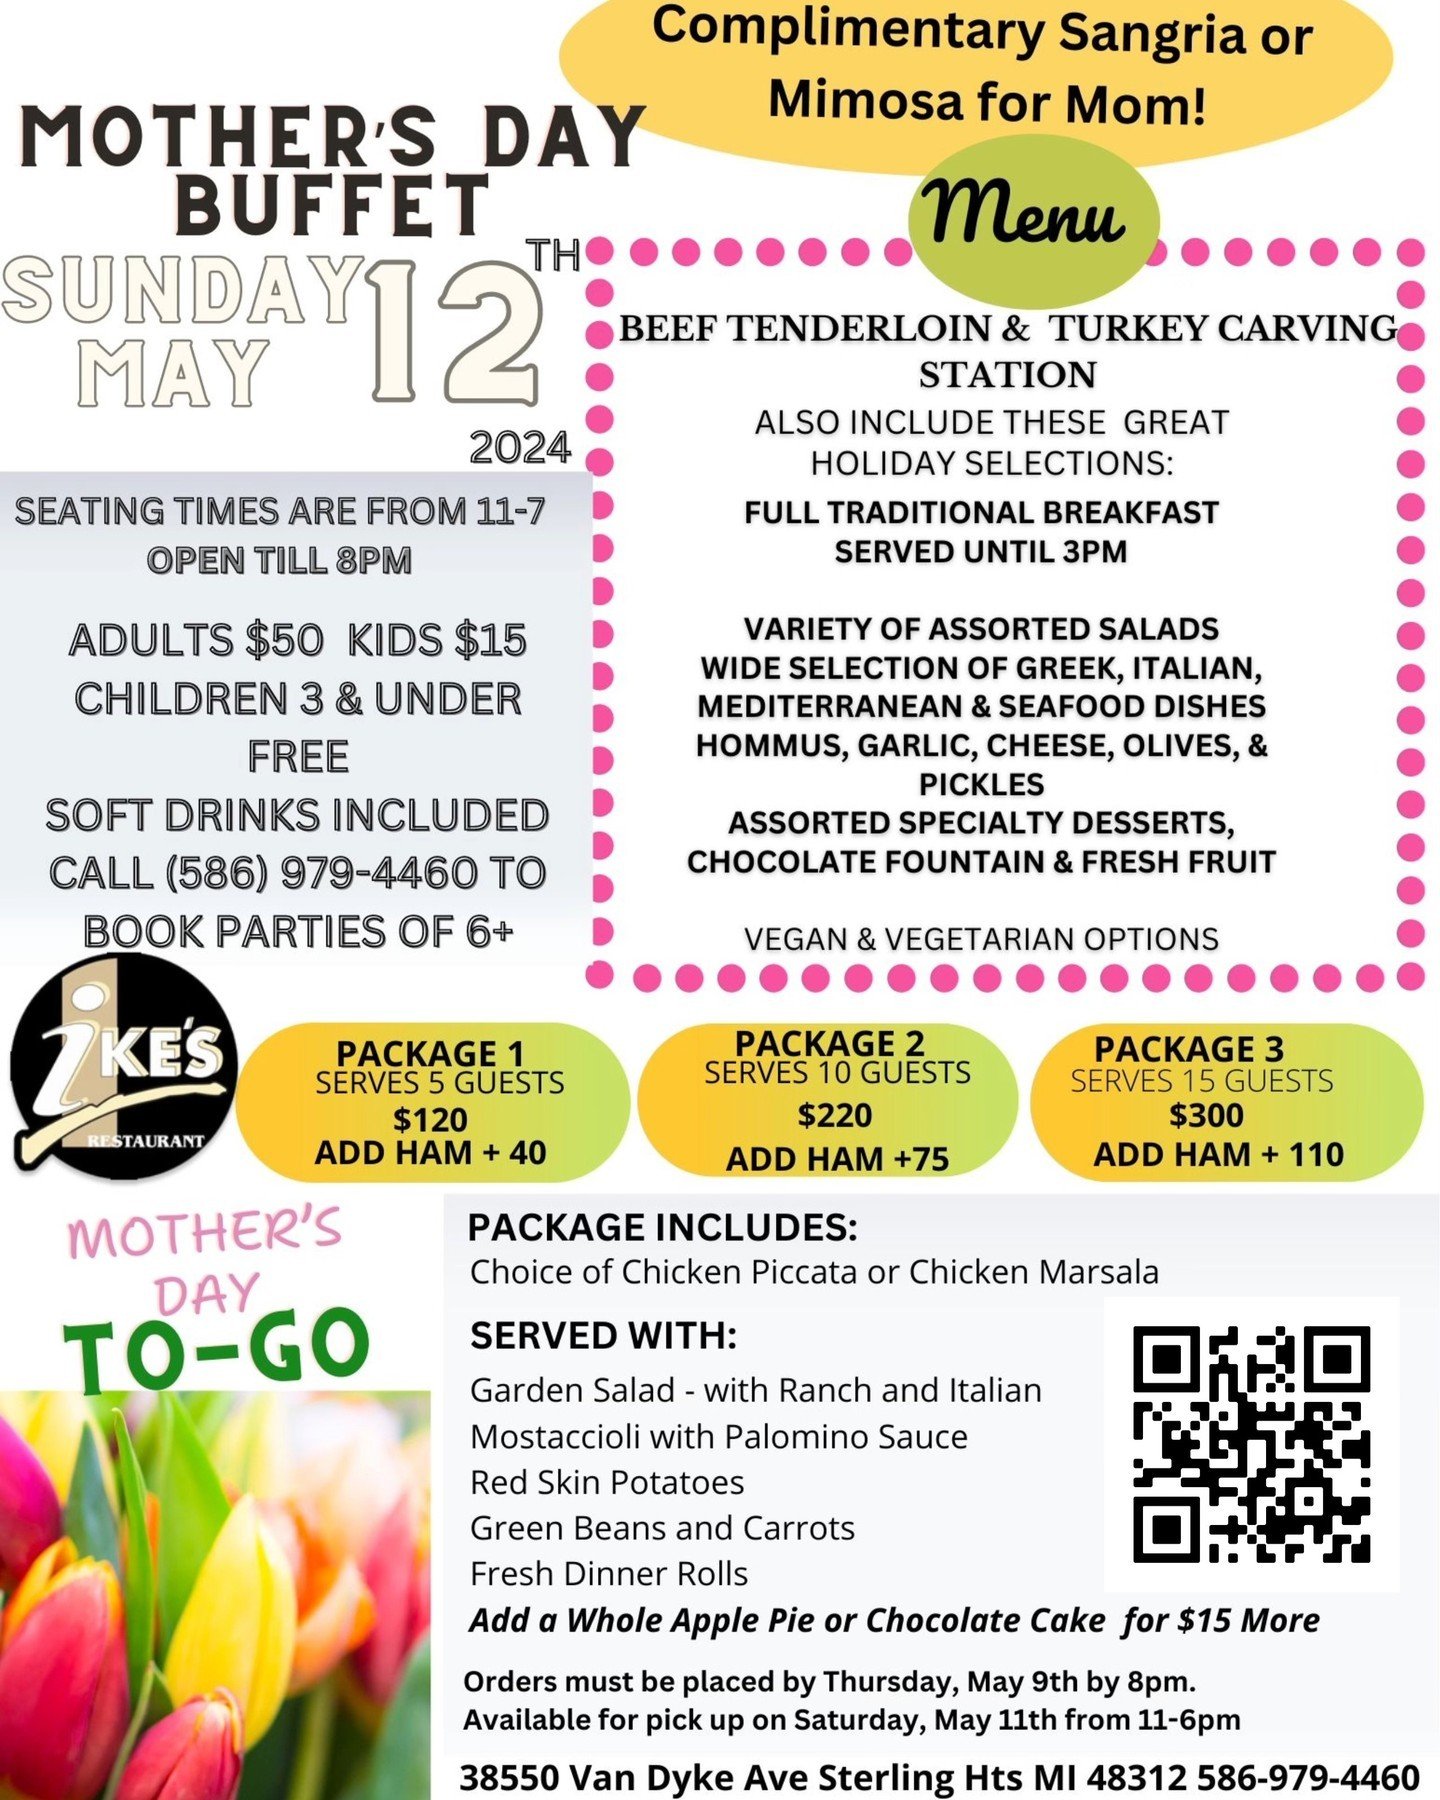 Mother's Day is just over ONE week away! Join us for our Mother's Day Buffet Brunch &amp; To-Go Package Options! Treat mom to a delicious spread at Ike's or take the celebration home.💐🍴 ⠀⠀
⠀⠀
📞 Call (586) 979-4460 to reserve a table of 6 or more f